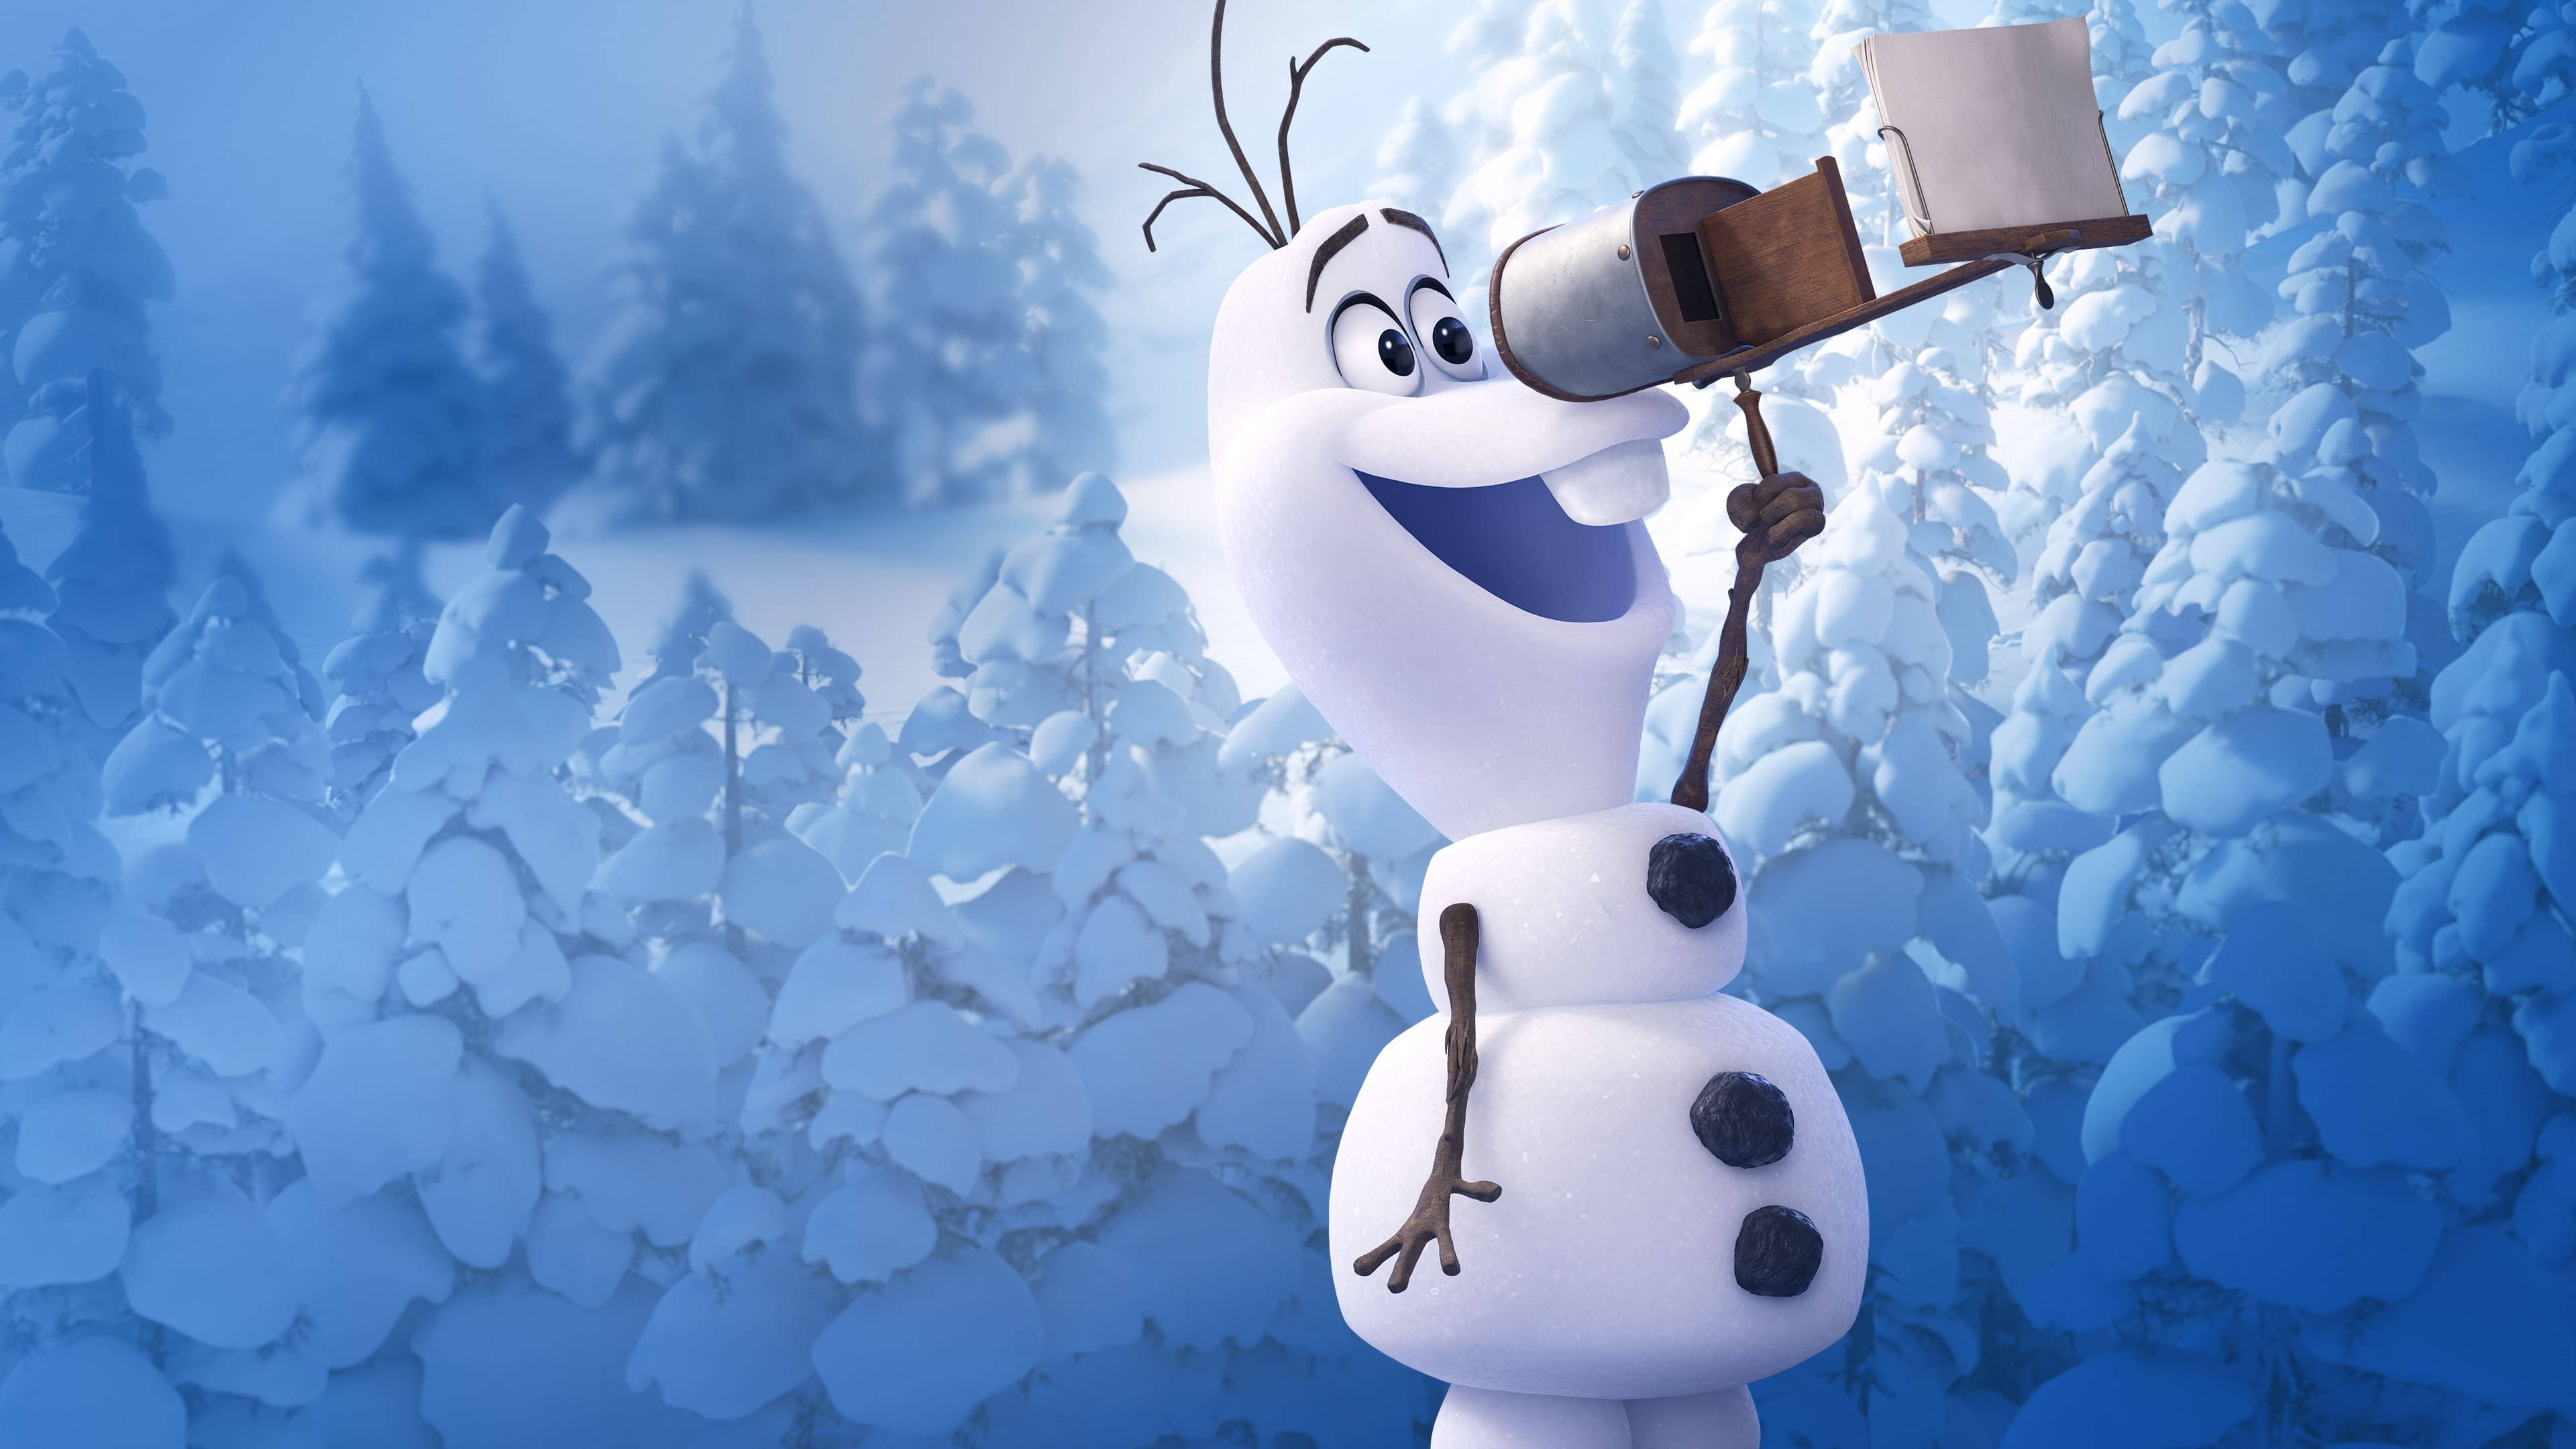 3840x2160 Download Olaf With No Carrot Nose Wallpaper